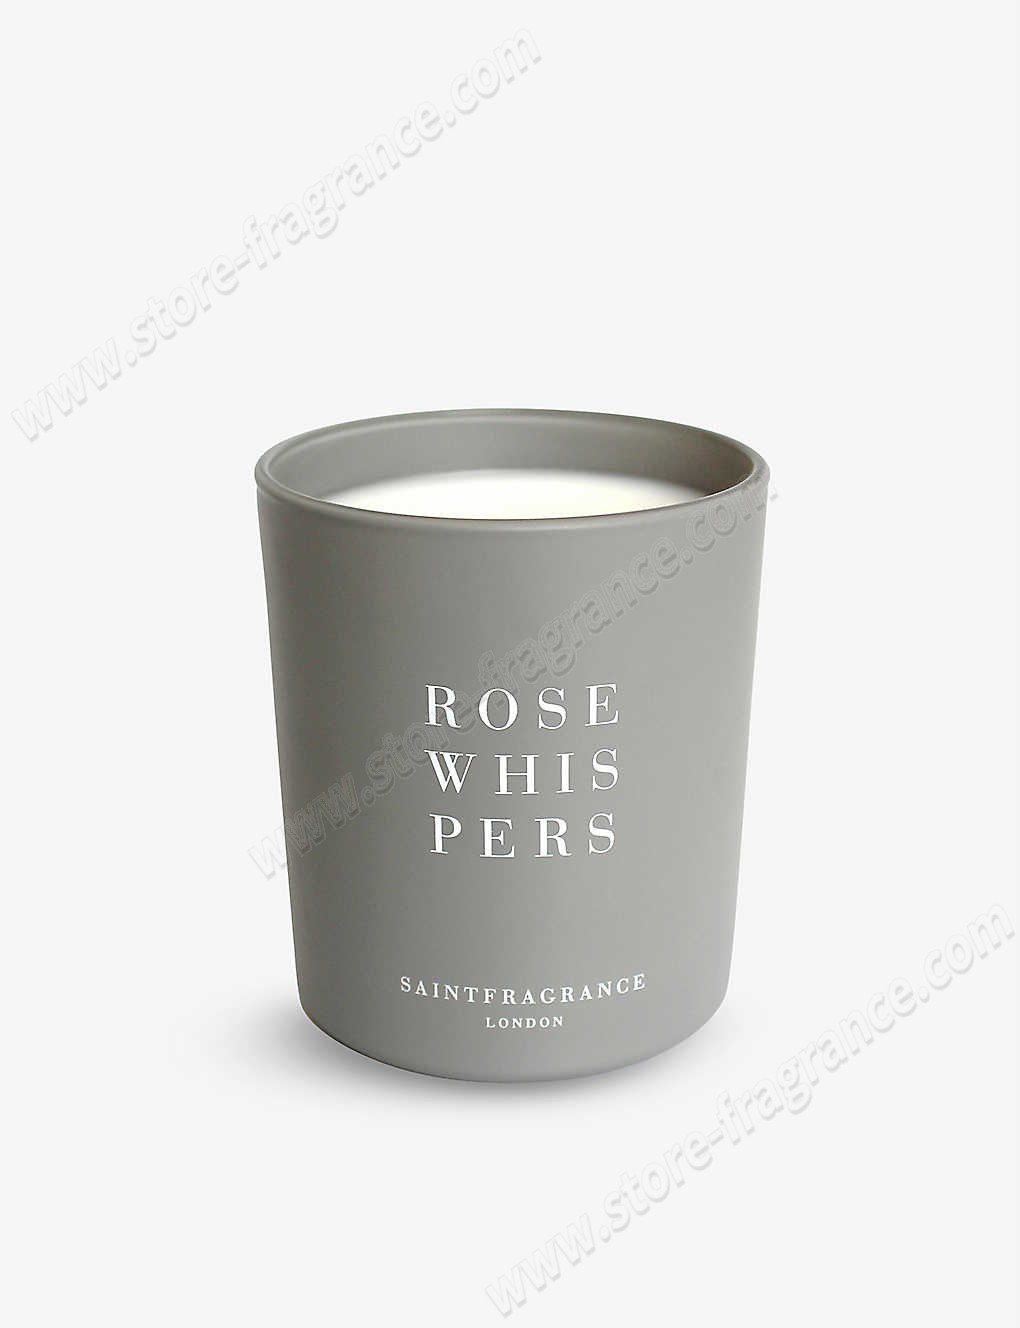 SAINT FRAGRANCE LONDON/Rose Whispers scented candle 200g ✿ Discount Store - -0